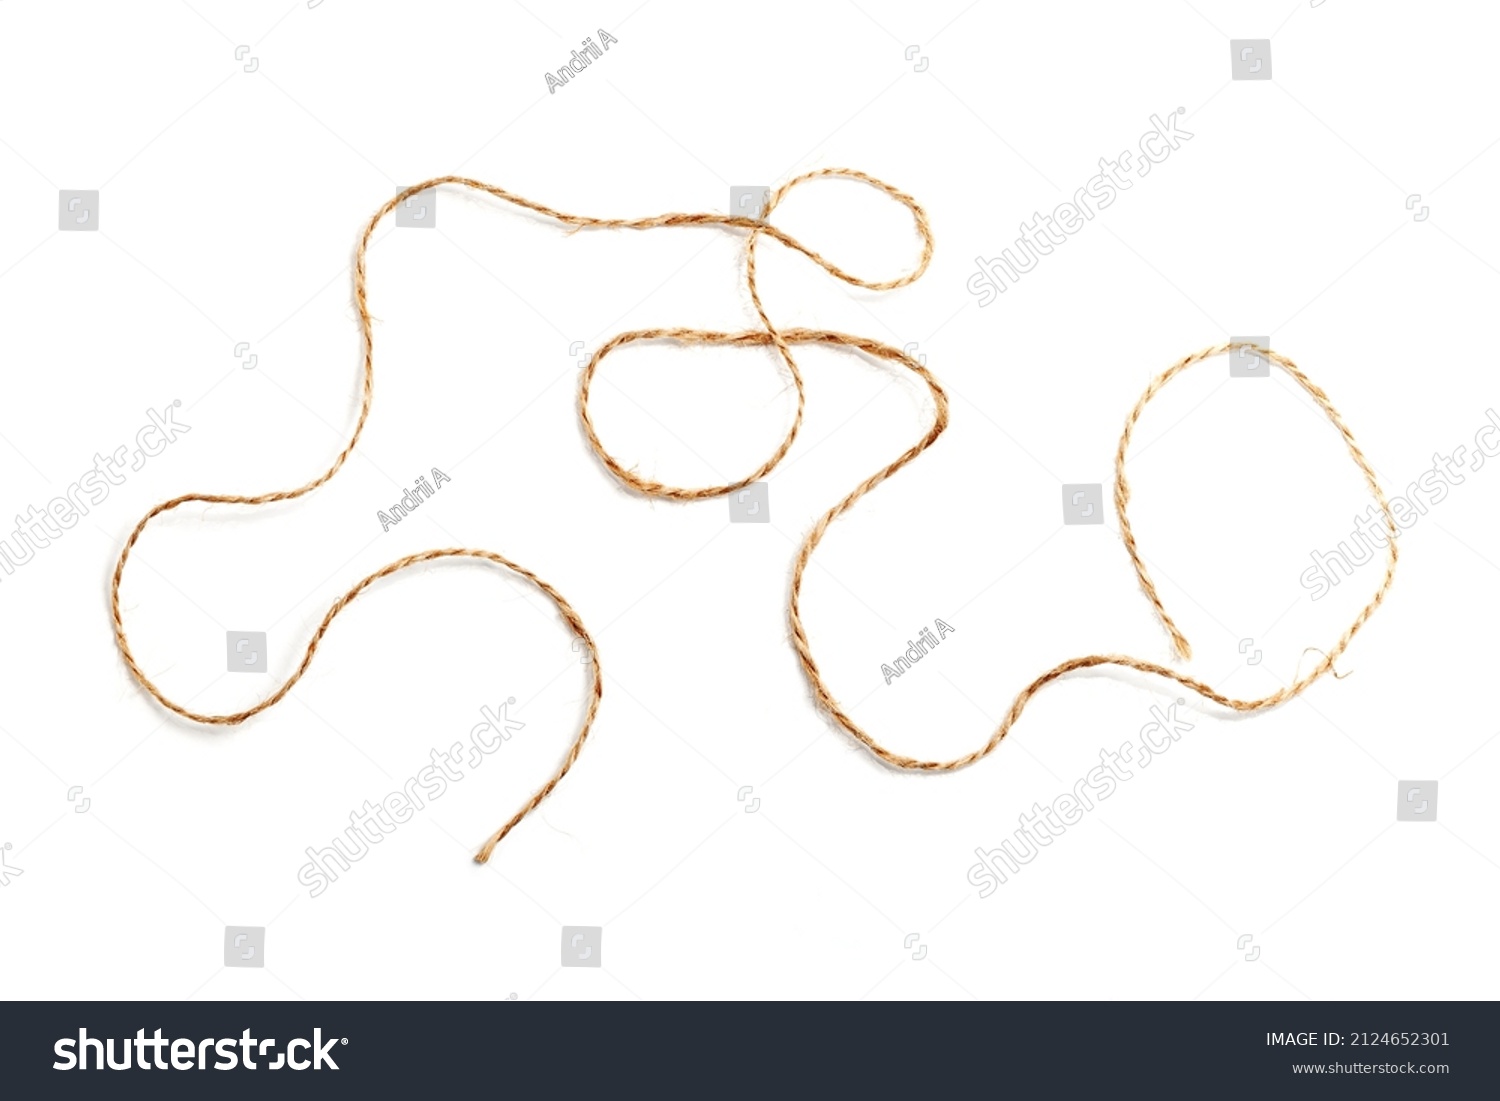 Piece of jute twine isolated on white background. Natural rope for packaging and decoration. Coarse linen threads. Hemp twine. #2124652301